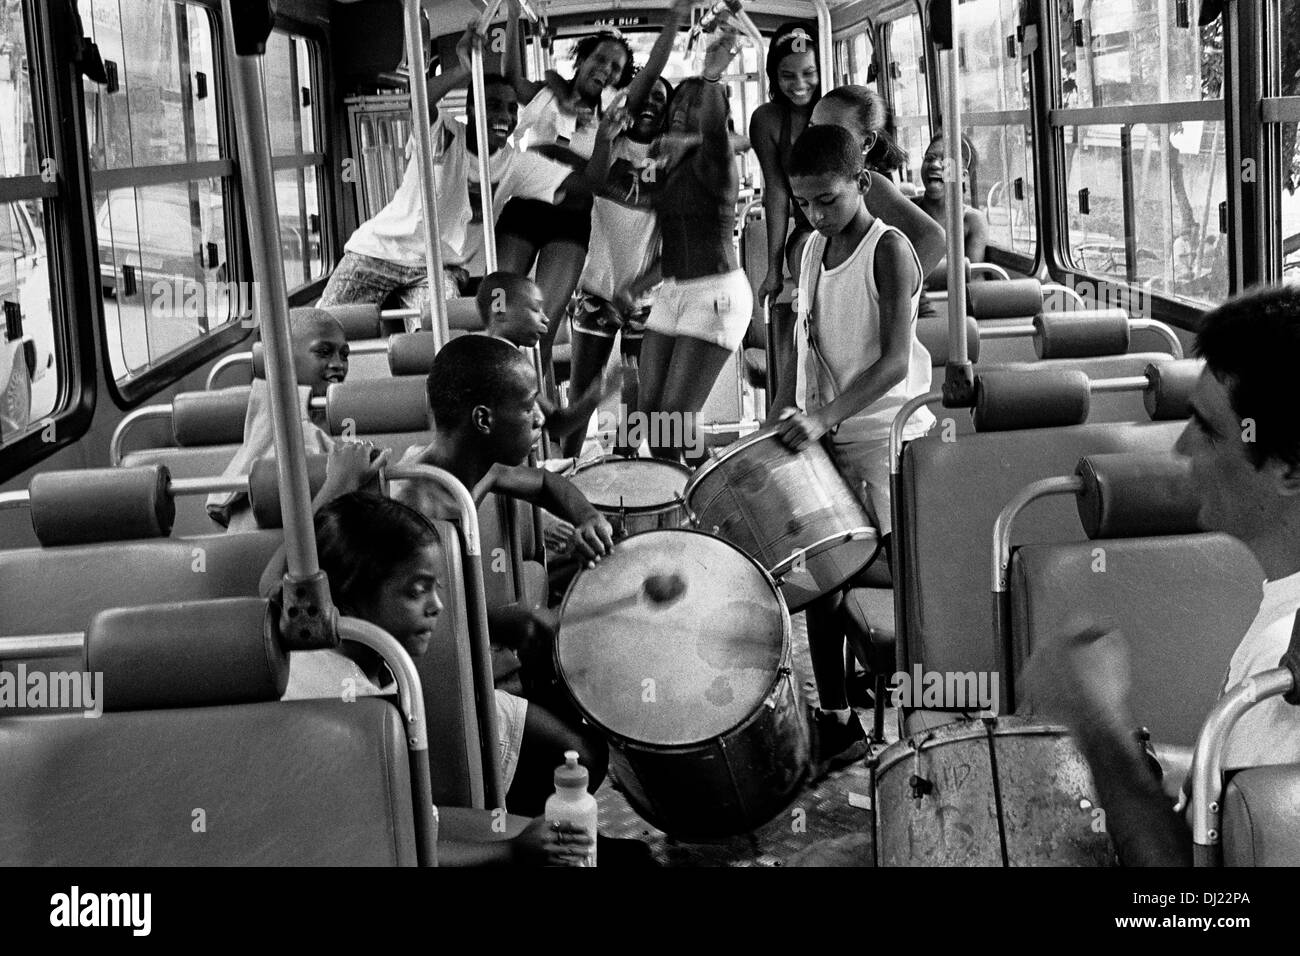 Young Brazilian people dance samba and play drums in a public bus on the street of Rio de Janeiro, Brazil. Stock Photo